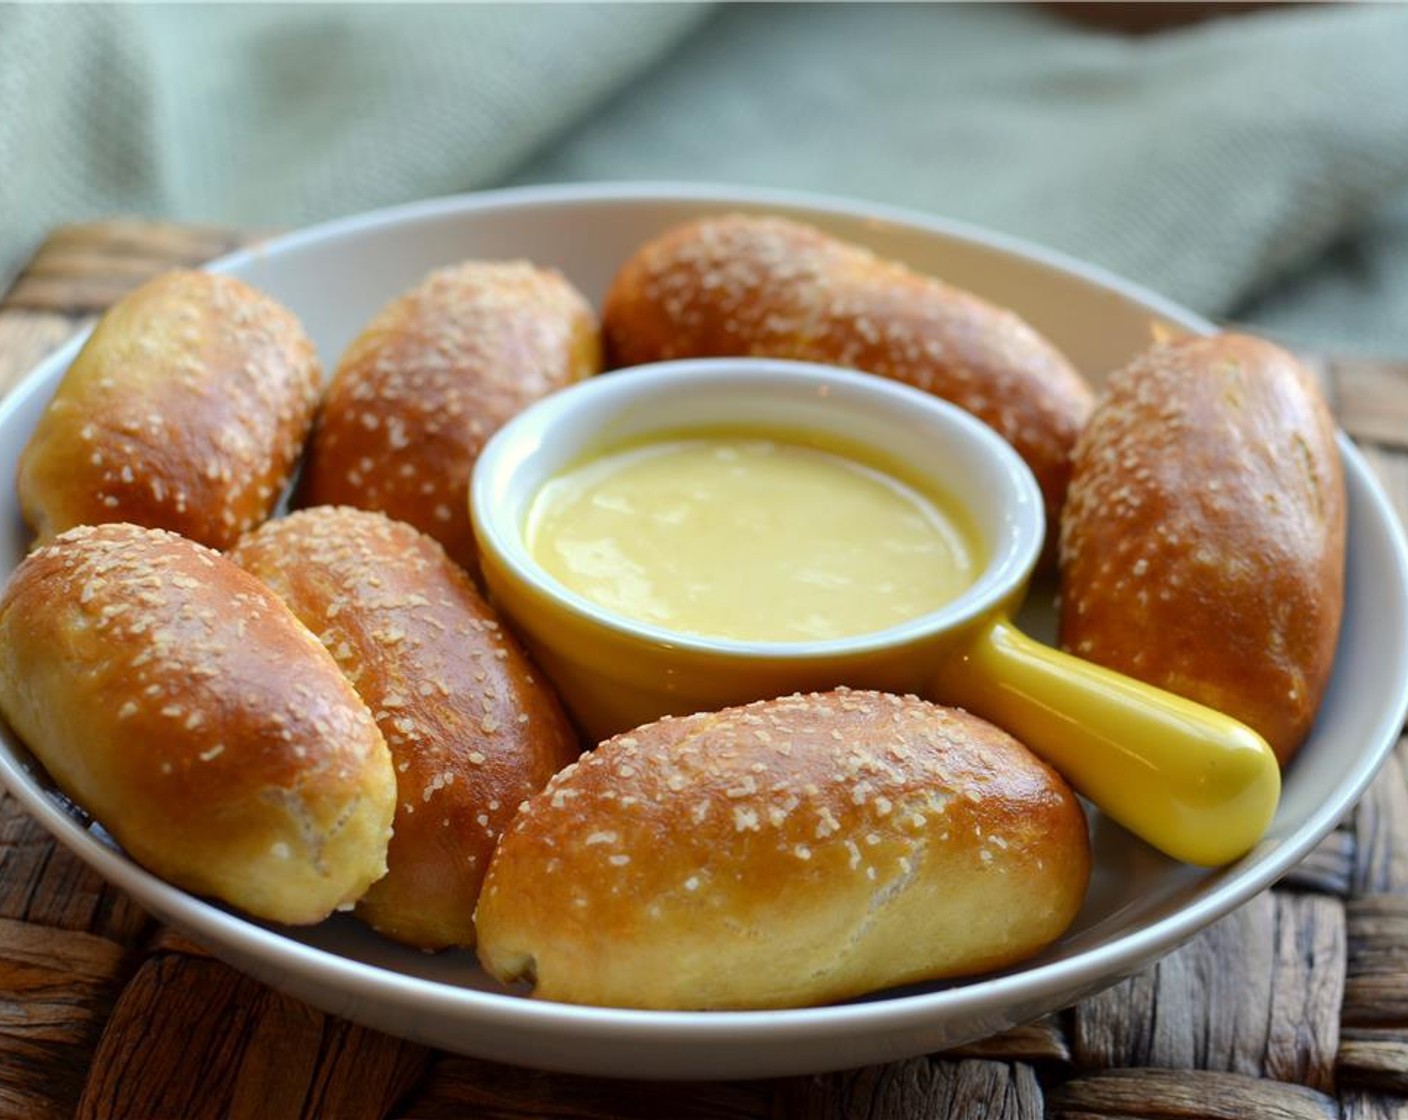 step 15 Serve the pretzel bites warm with the honey mustard dipping sauce!